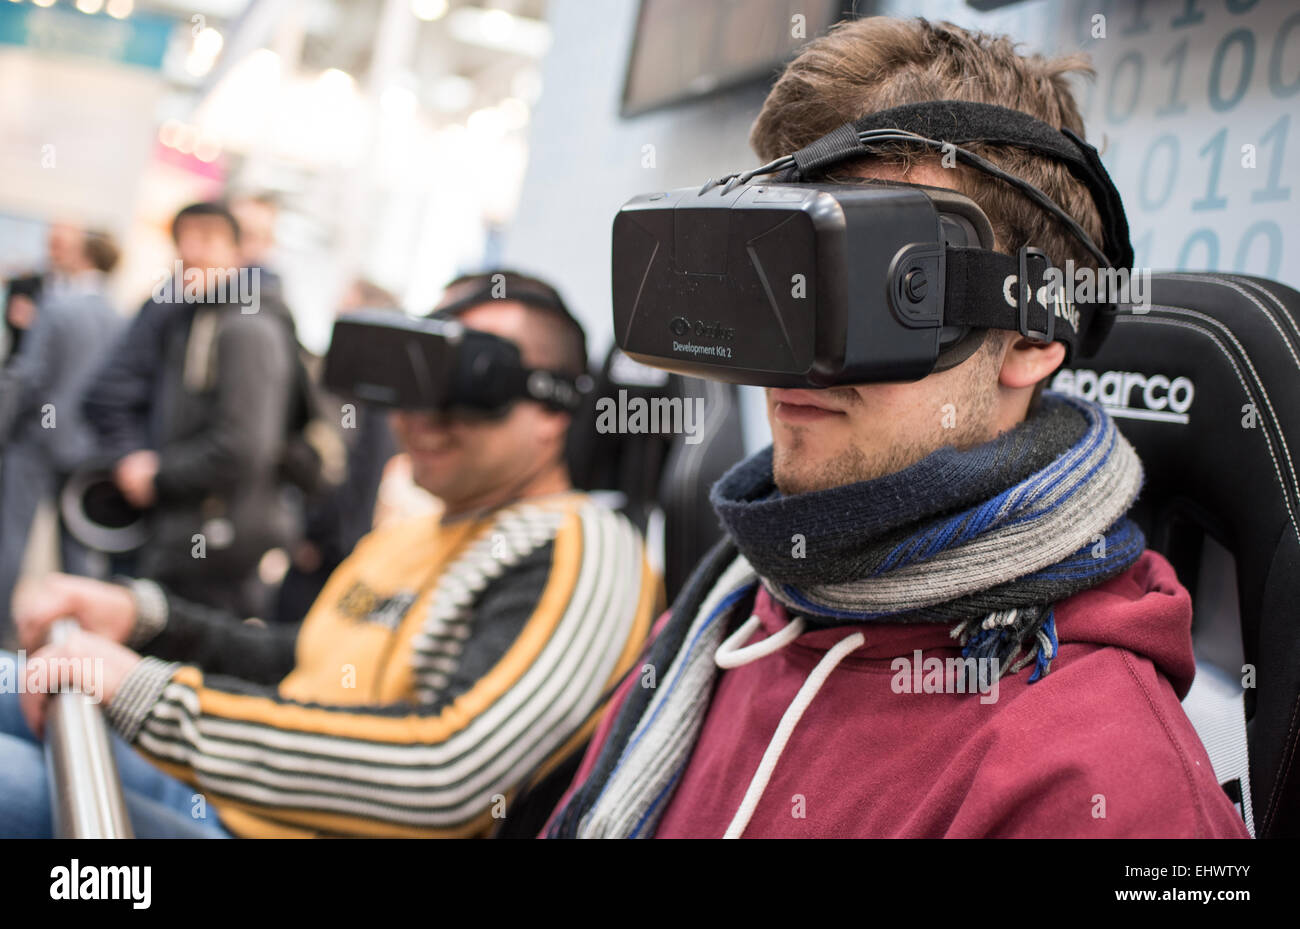 Visitors try the new Oculus Rift virutal reality data glasses during the computer and electronics fair 'CeBIT 2015' in Hanover, Germany, 17 March 2015. The CeBIT 2015 continues until 20 March 2015. Photo: Ole Spata/dpa Stock Photo